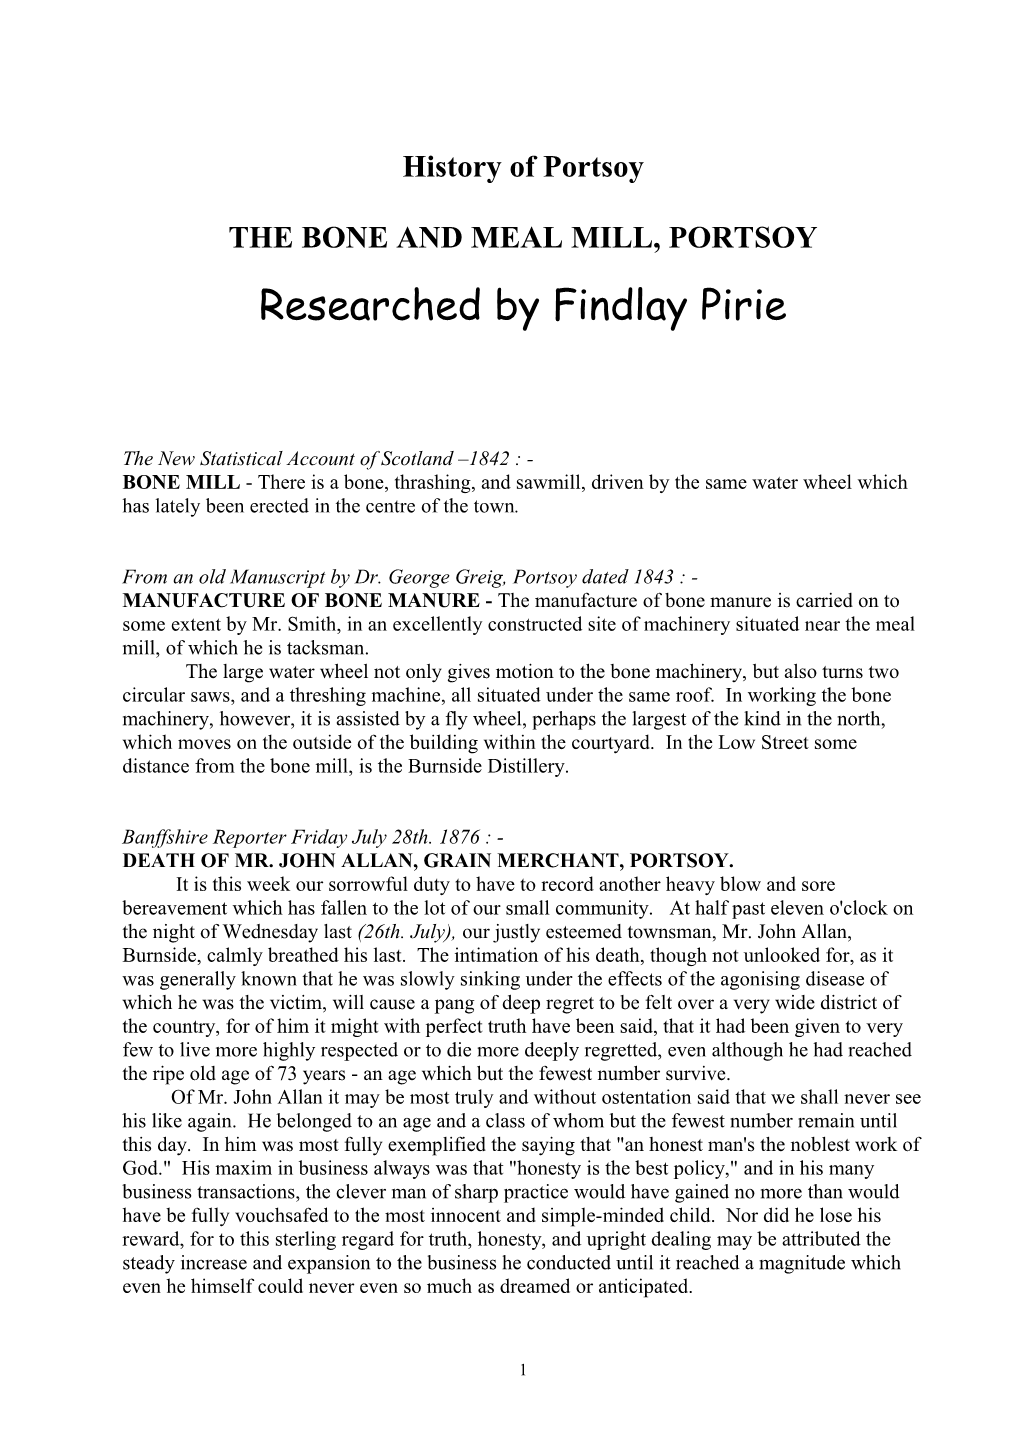 The Bone and Meal Mill, Portsoy